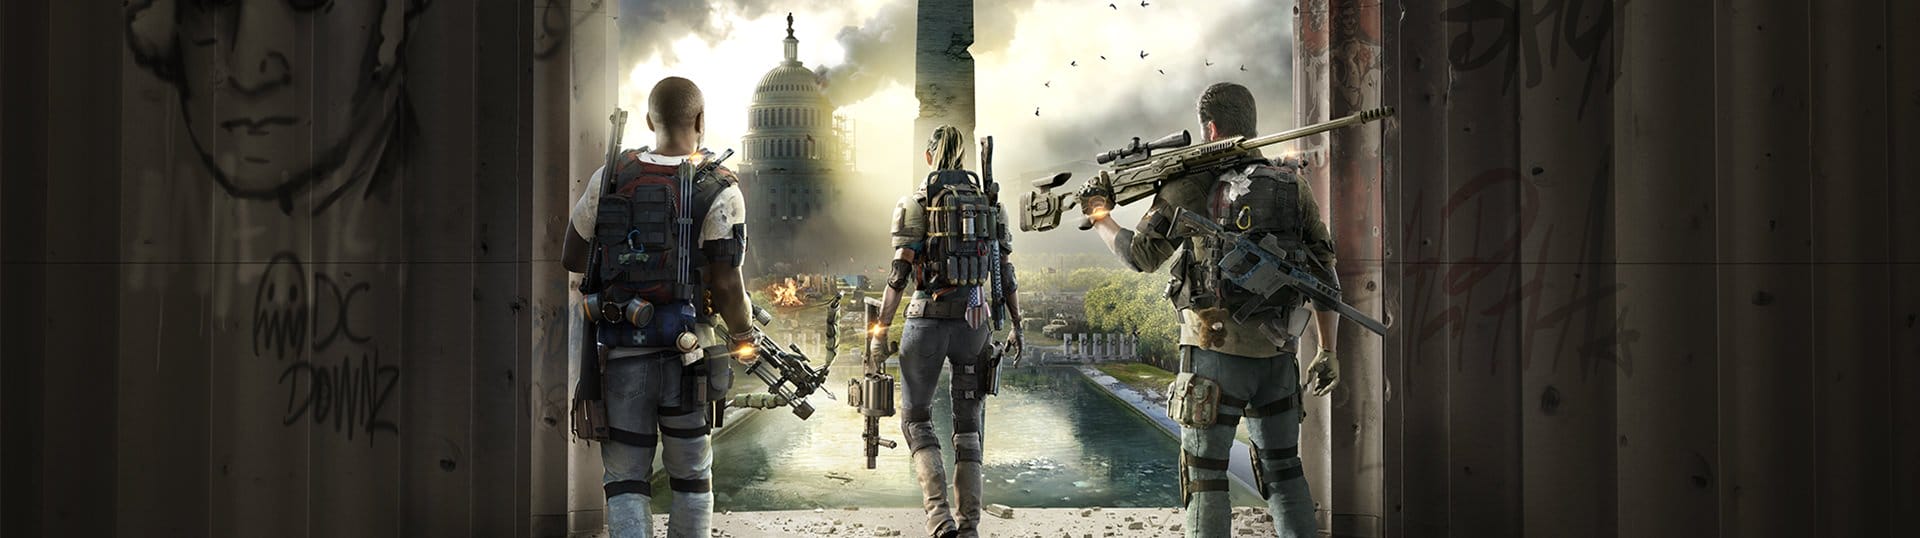 The Division 2 Will NOT Support Cross-play